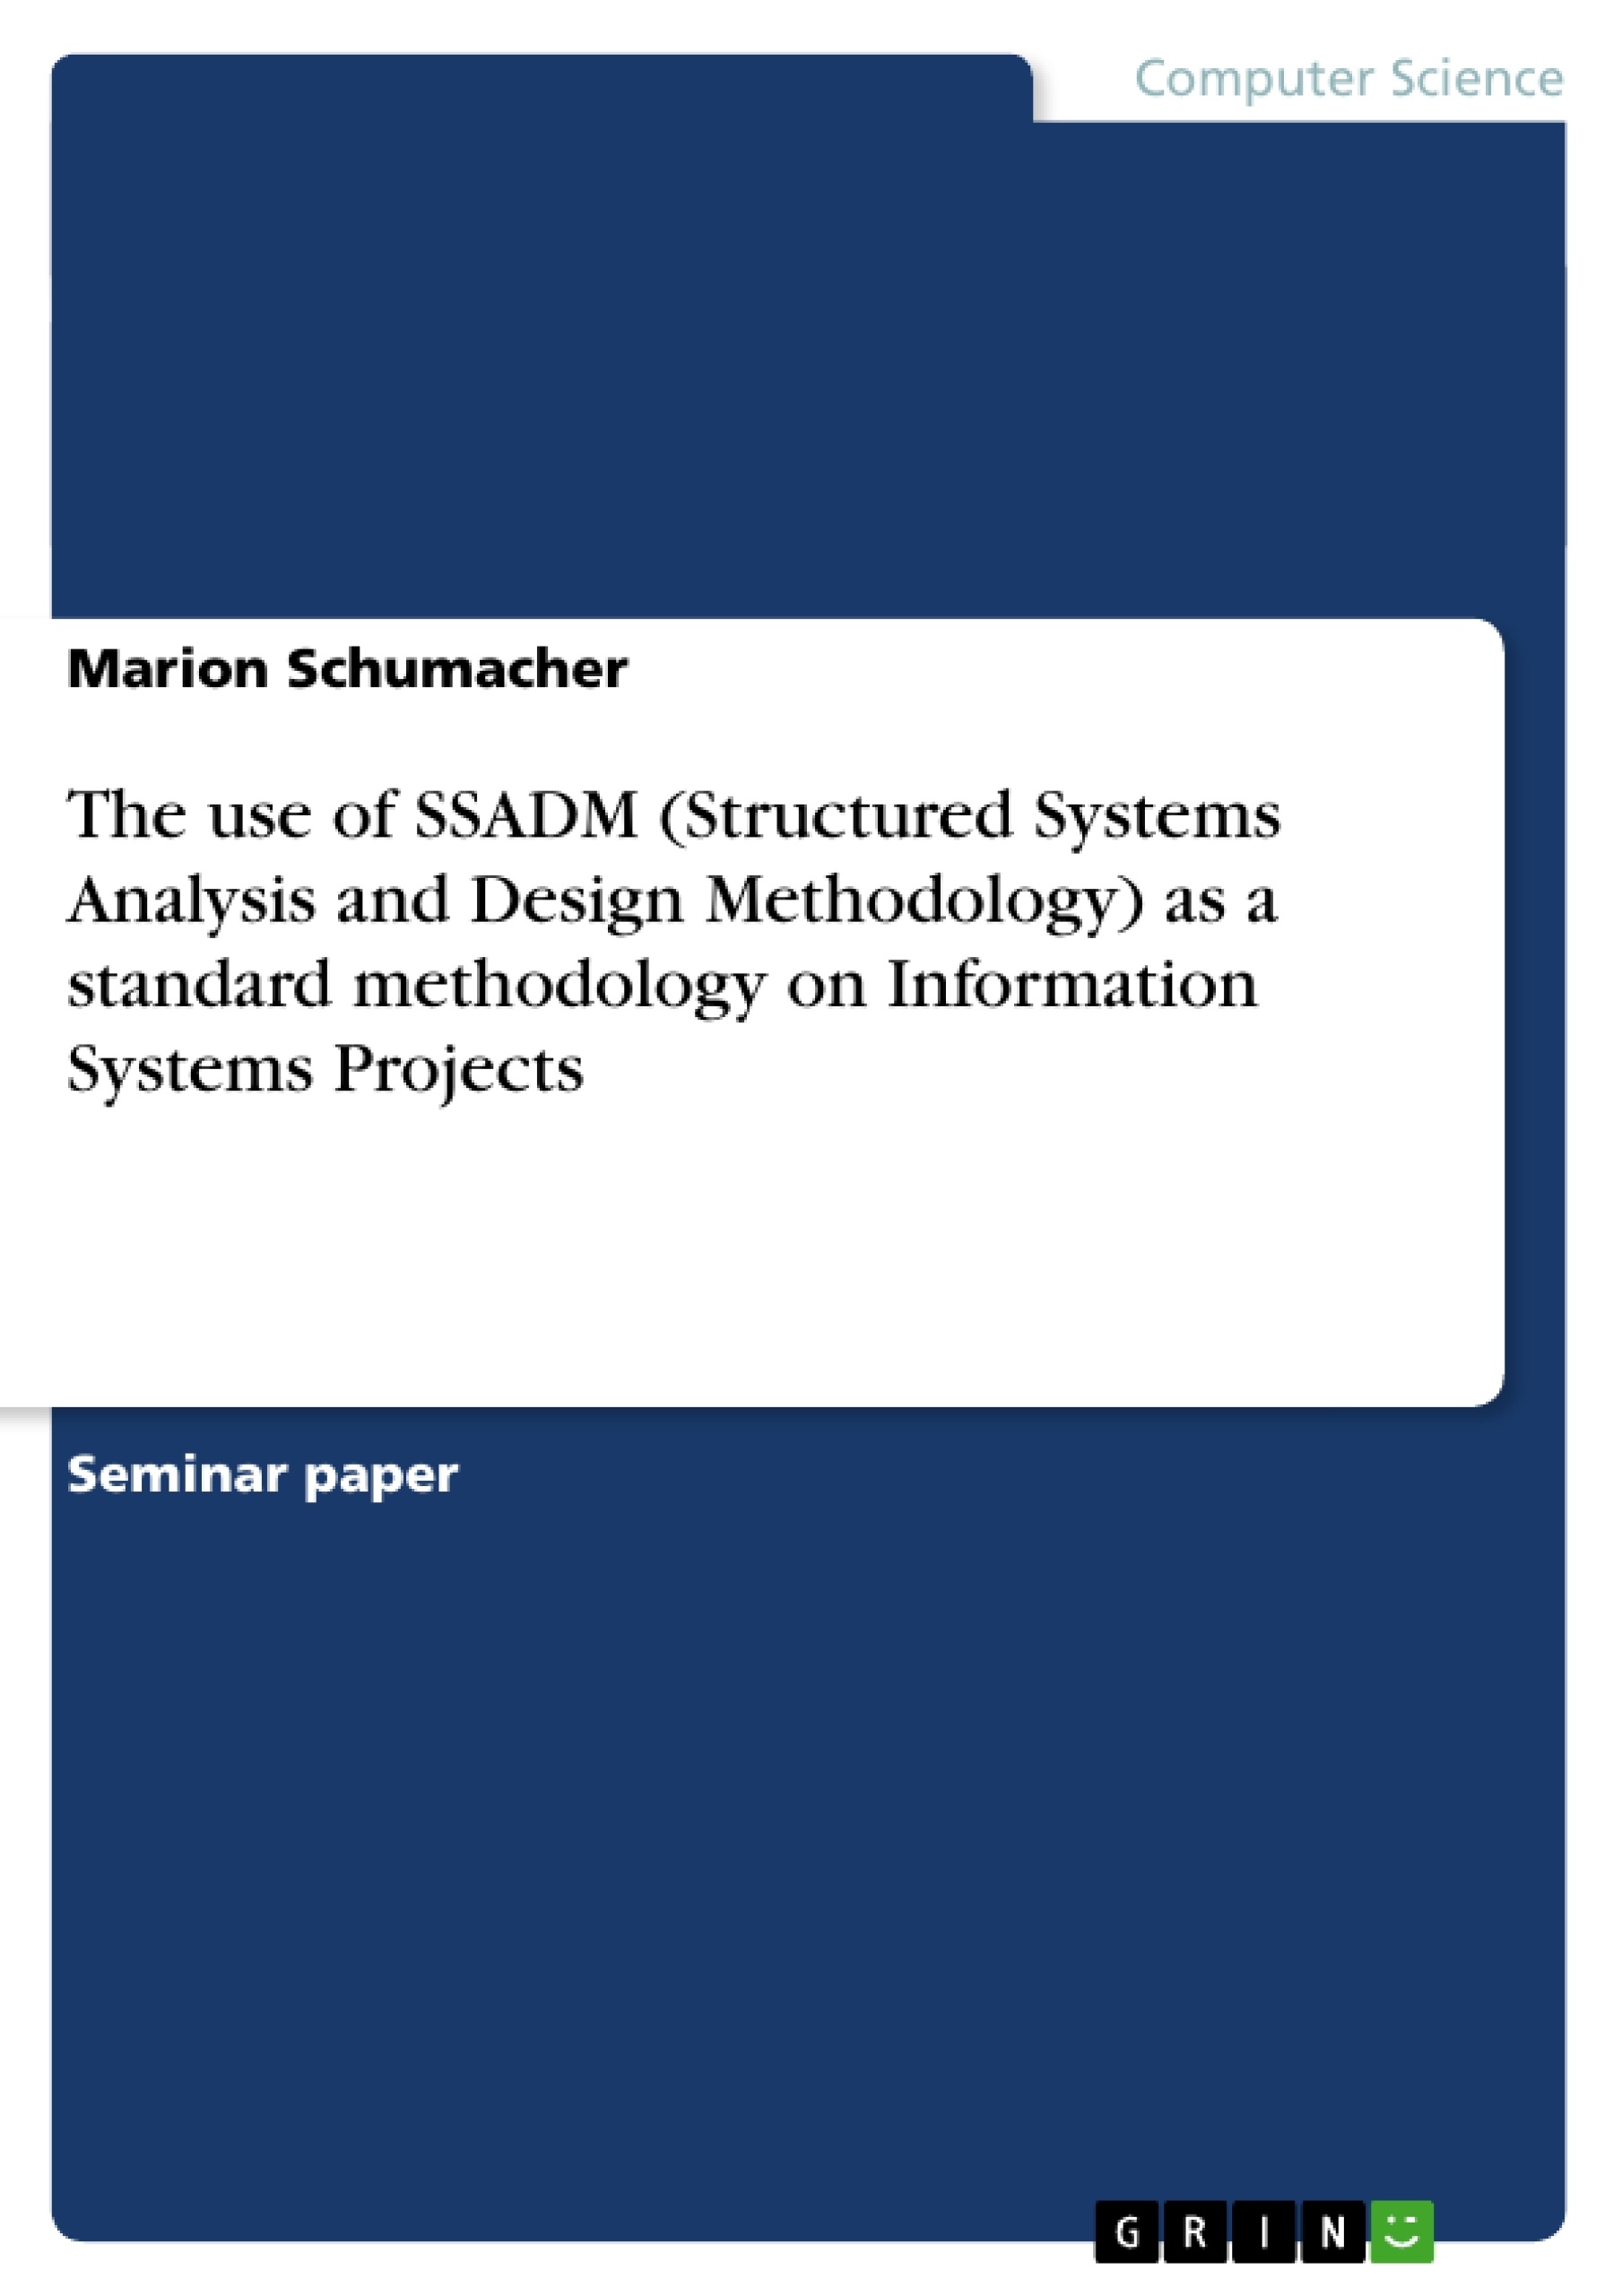 Title: The use of SSADM (Structured Systems Analysis and Design Methodology) as a standard methodology on Information Systems Projects